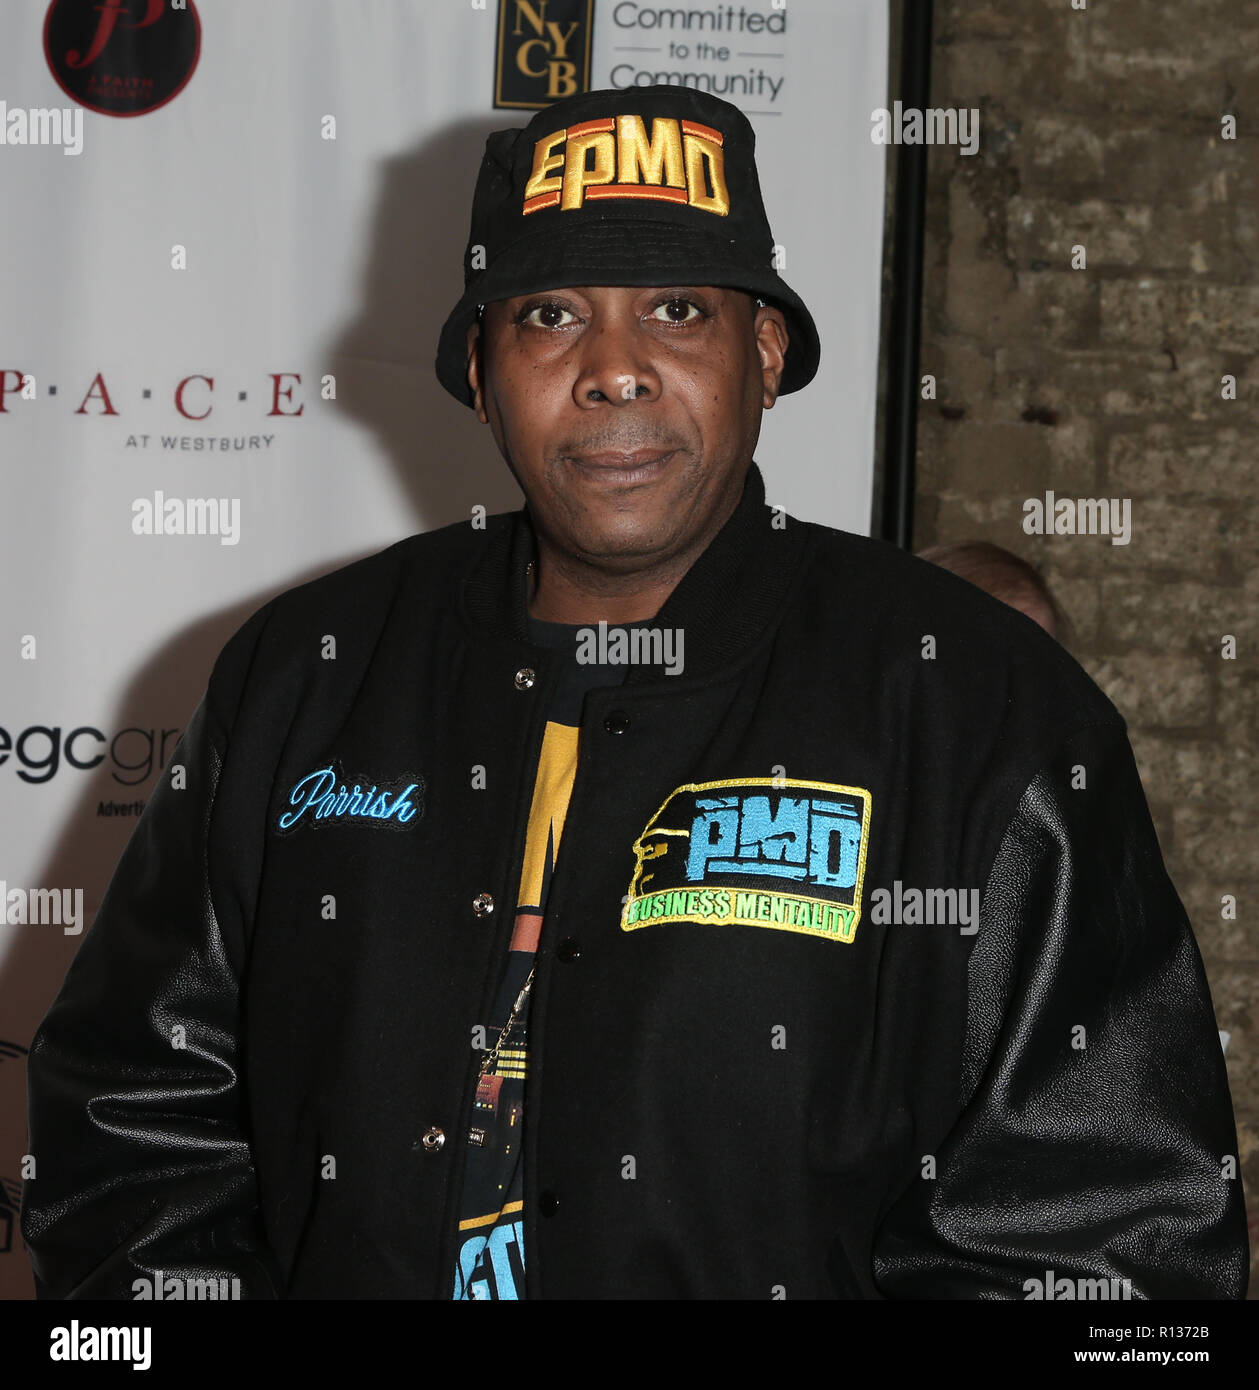 Westbury, United States. 08th Nov, 2018. WESTBURY, NY - NOV 8: Rapper Parrish Smith of EPMD attends the 2018 Long Island Music Hall of Fame induction ceremony at The Space at Westbury on November 8, 2018 in Westbury, New York. Credit: The Photo Access/Alamy Live News Stock Photo